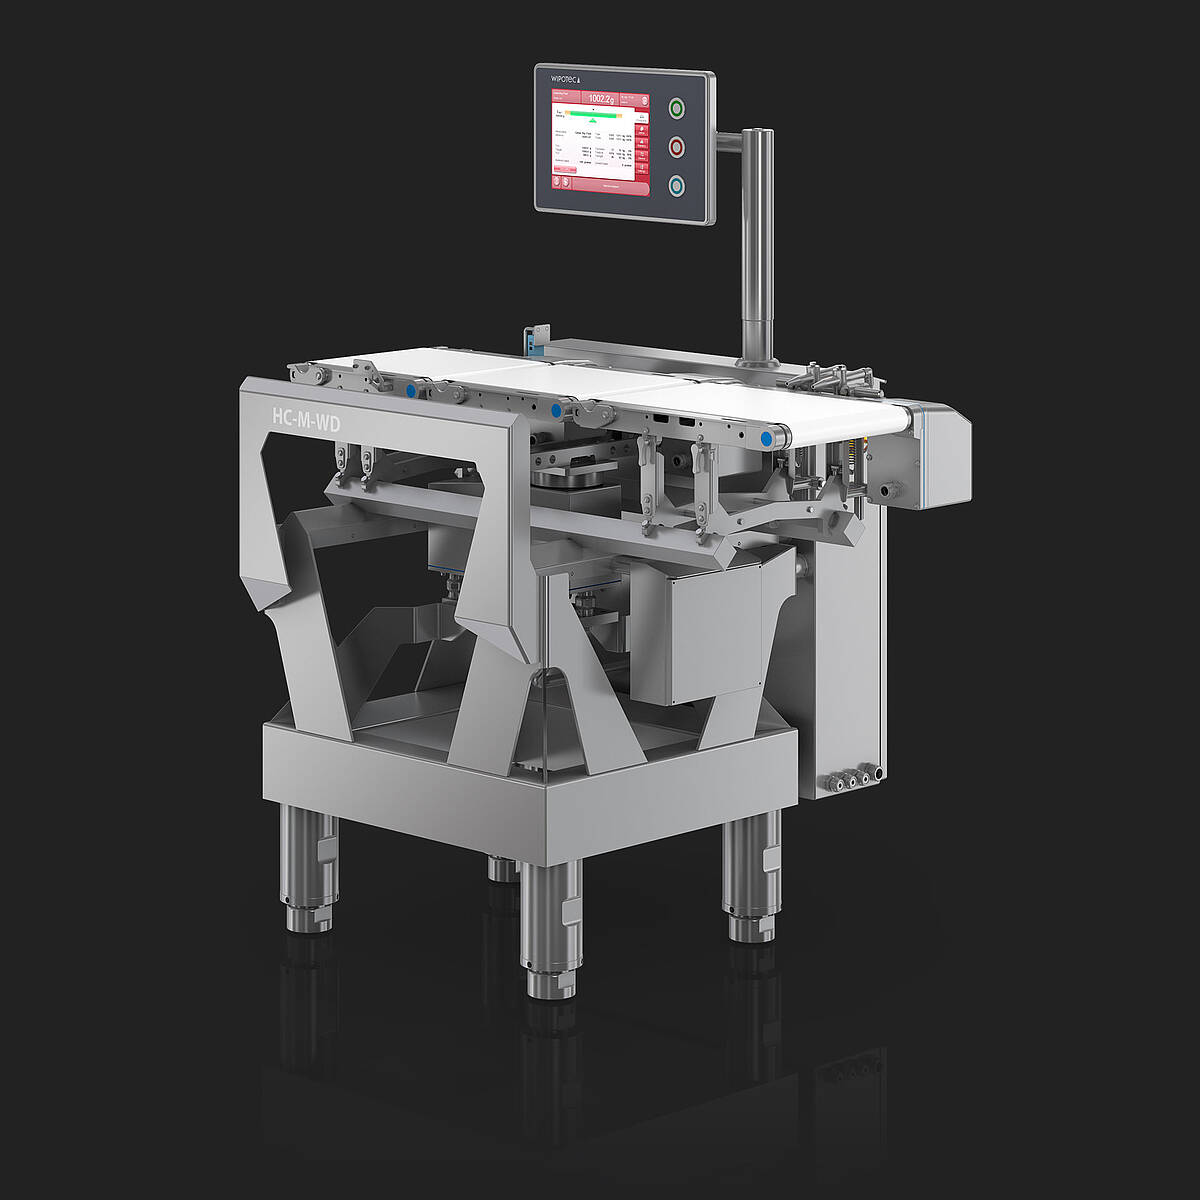 Checkweigher HC-M-WD right view